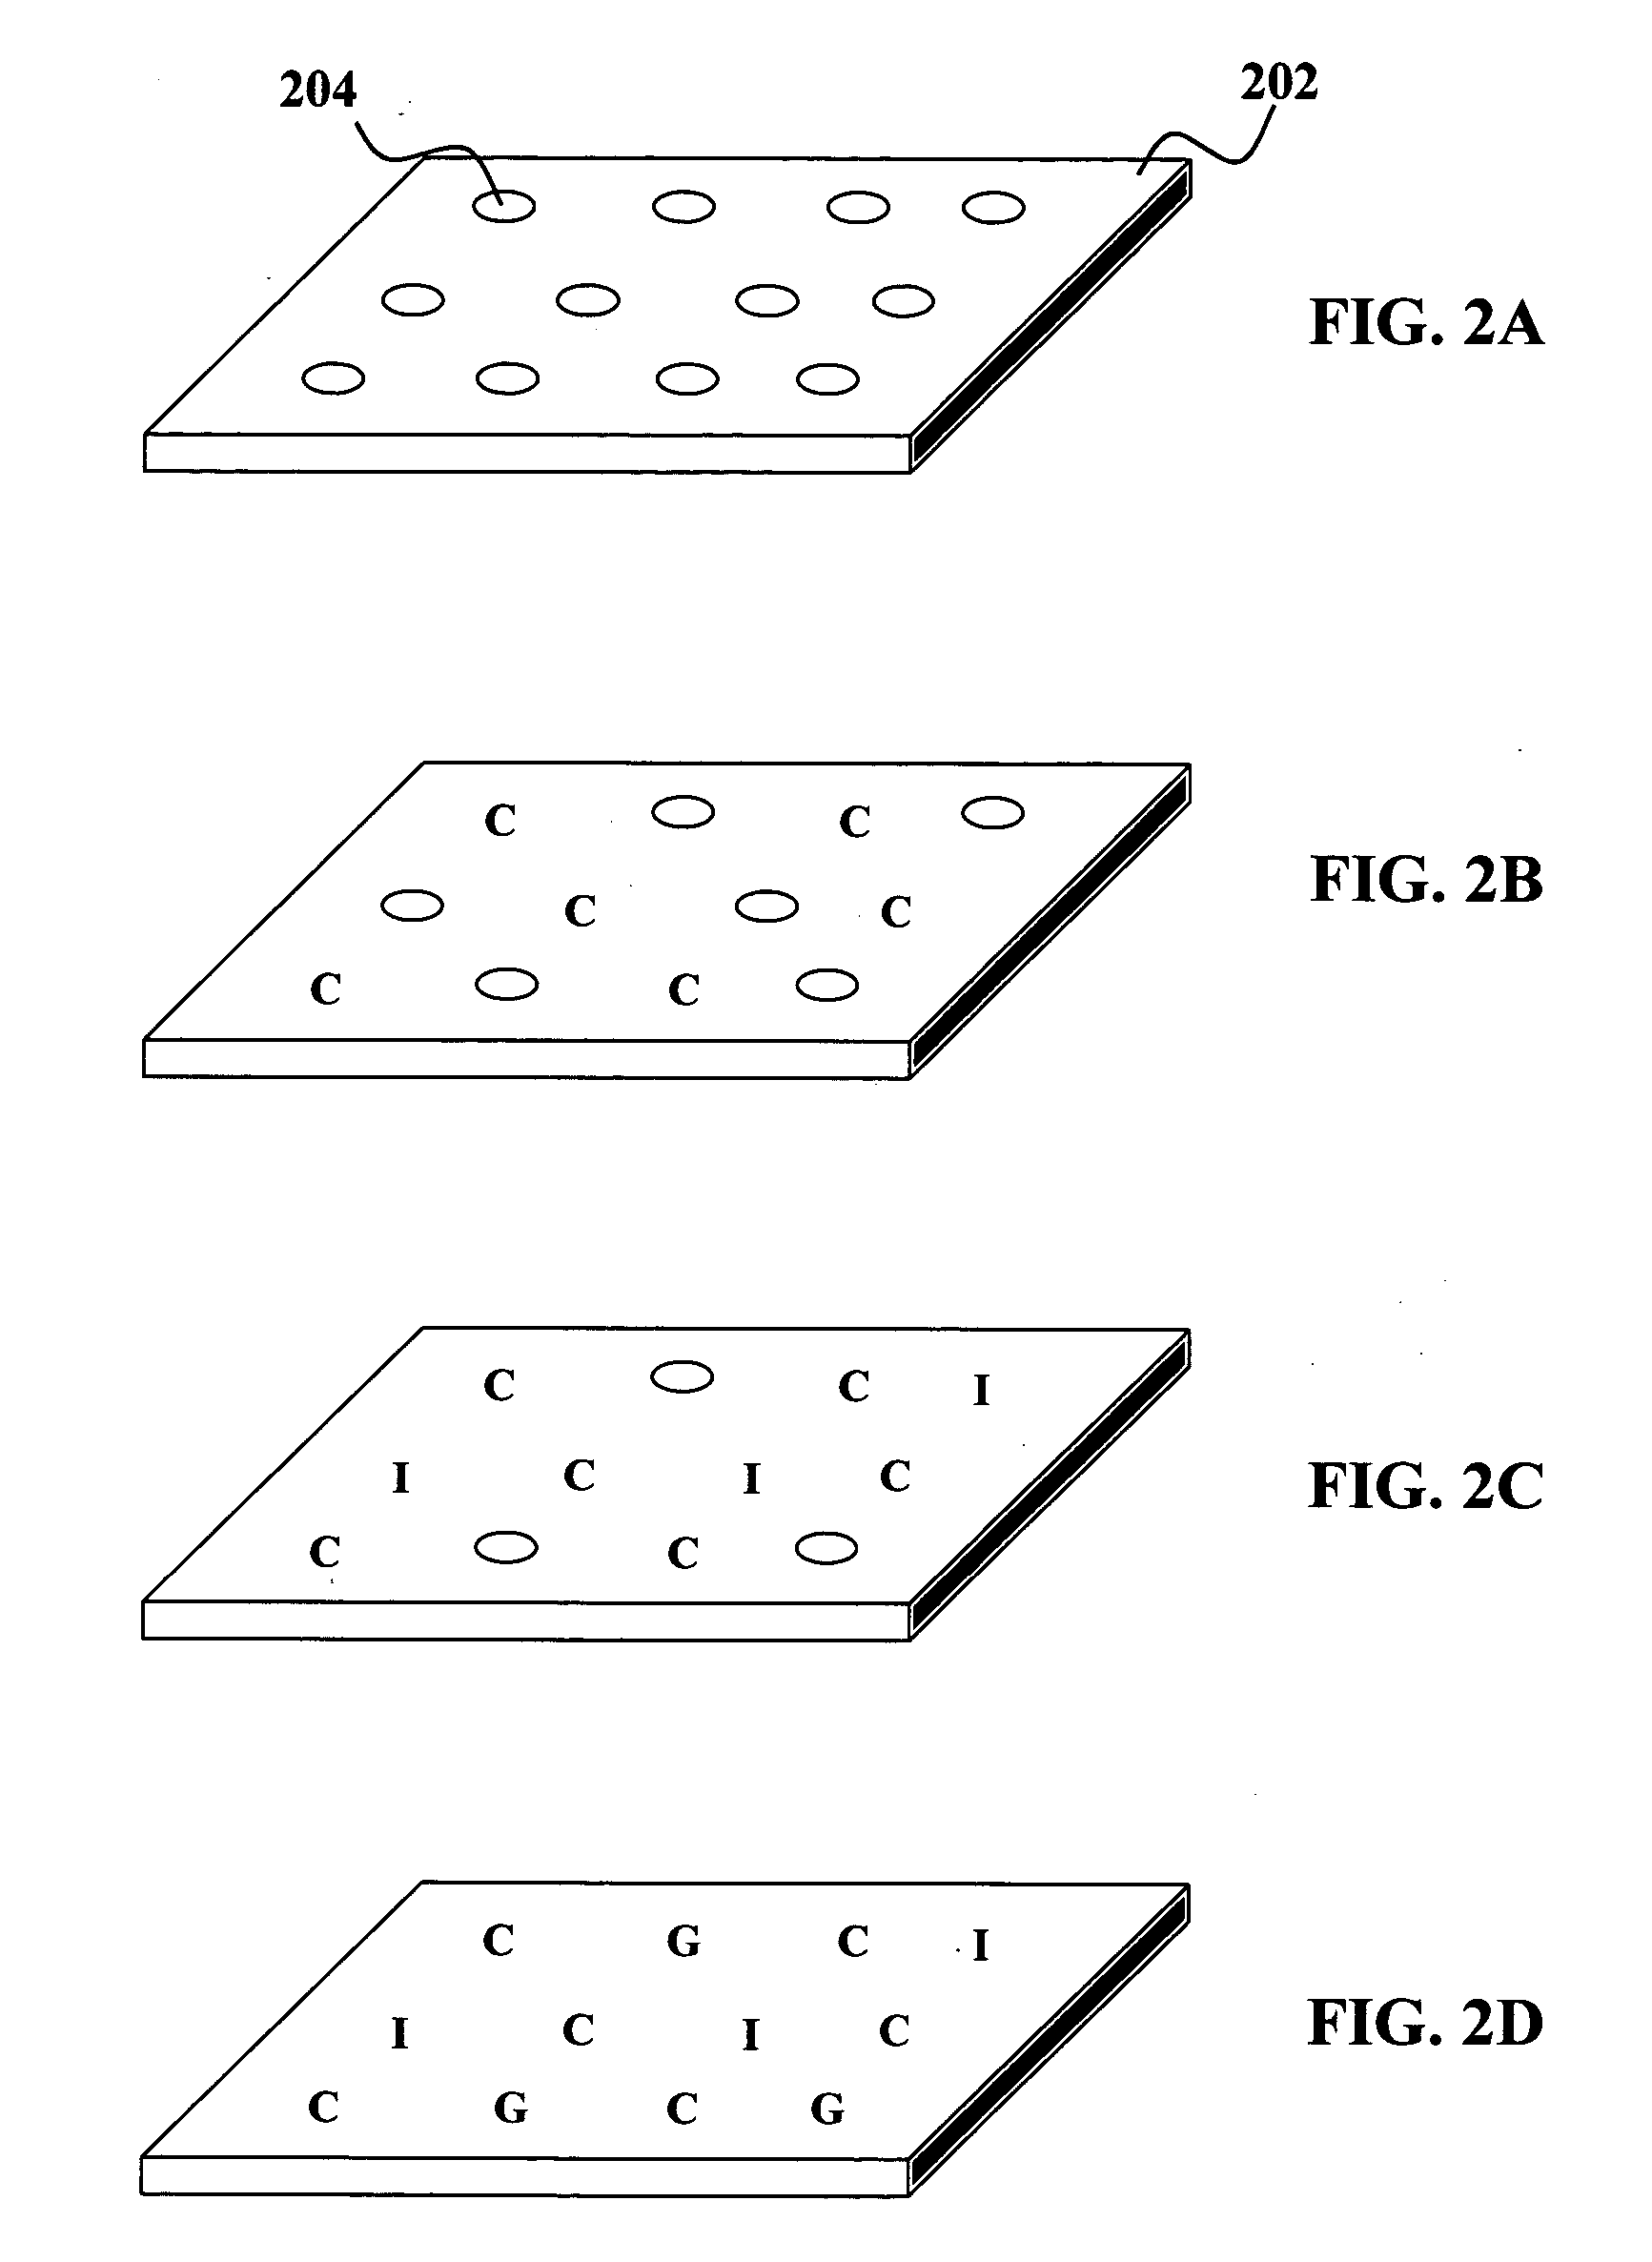 Formation of CIGS absorber layer materials using atomic layer deposition and high throughput surface treatment